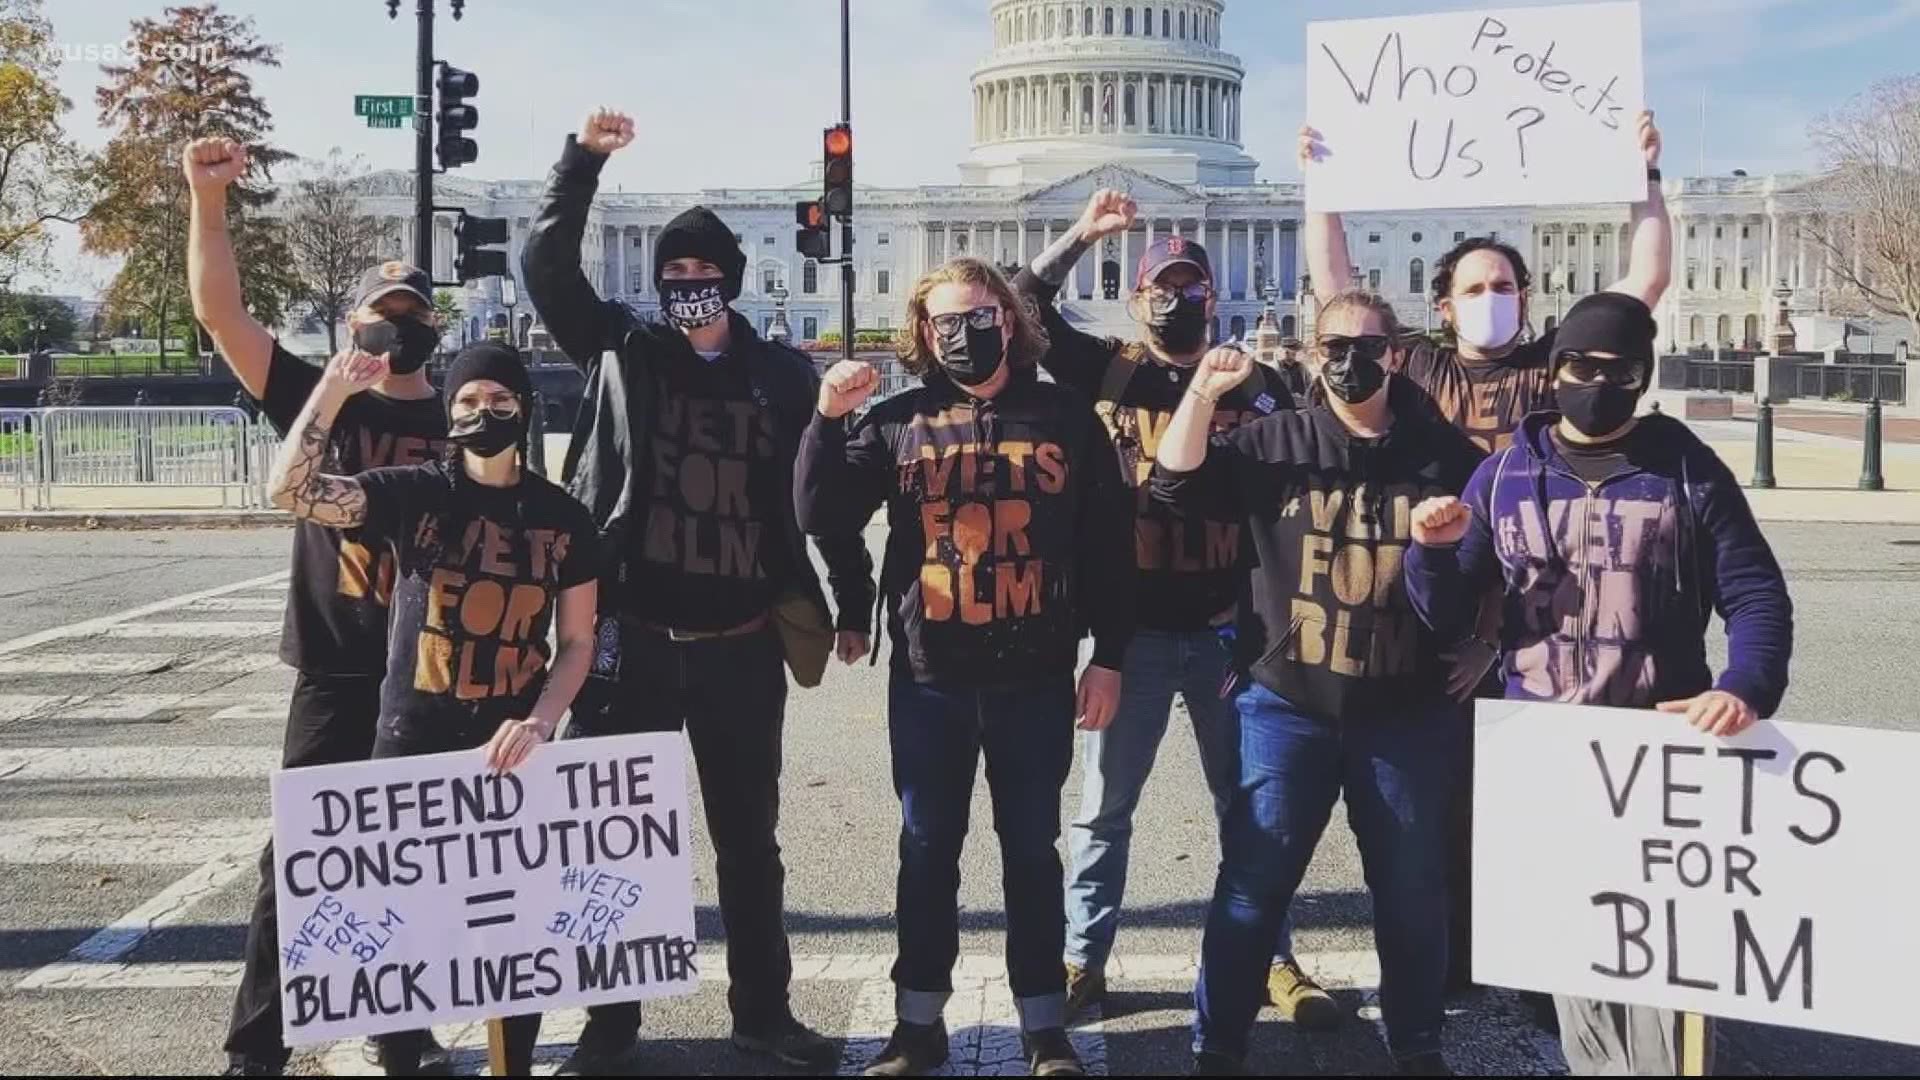 Navy vet David Smith founded Continue to Serve after watching federal forces tear gas peaceful protesters. Now, his group is helping to clean after the Capitol riot.